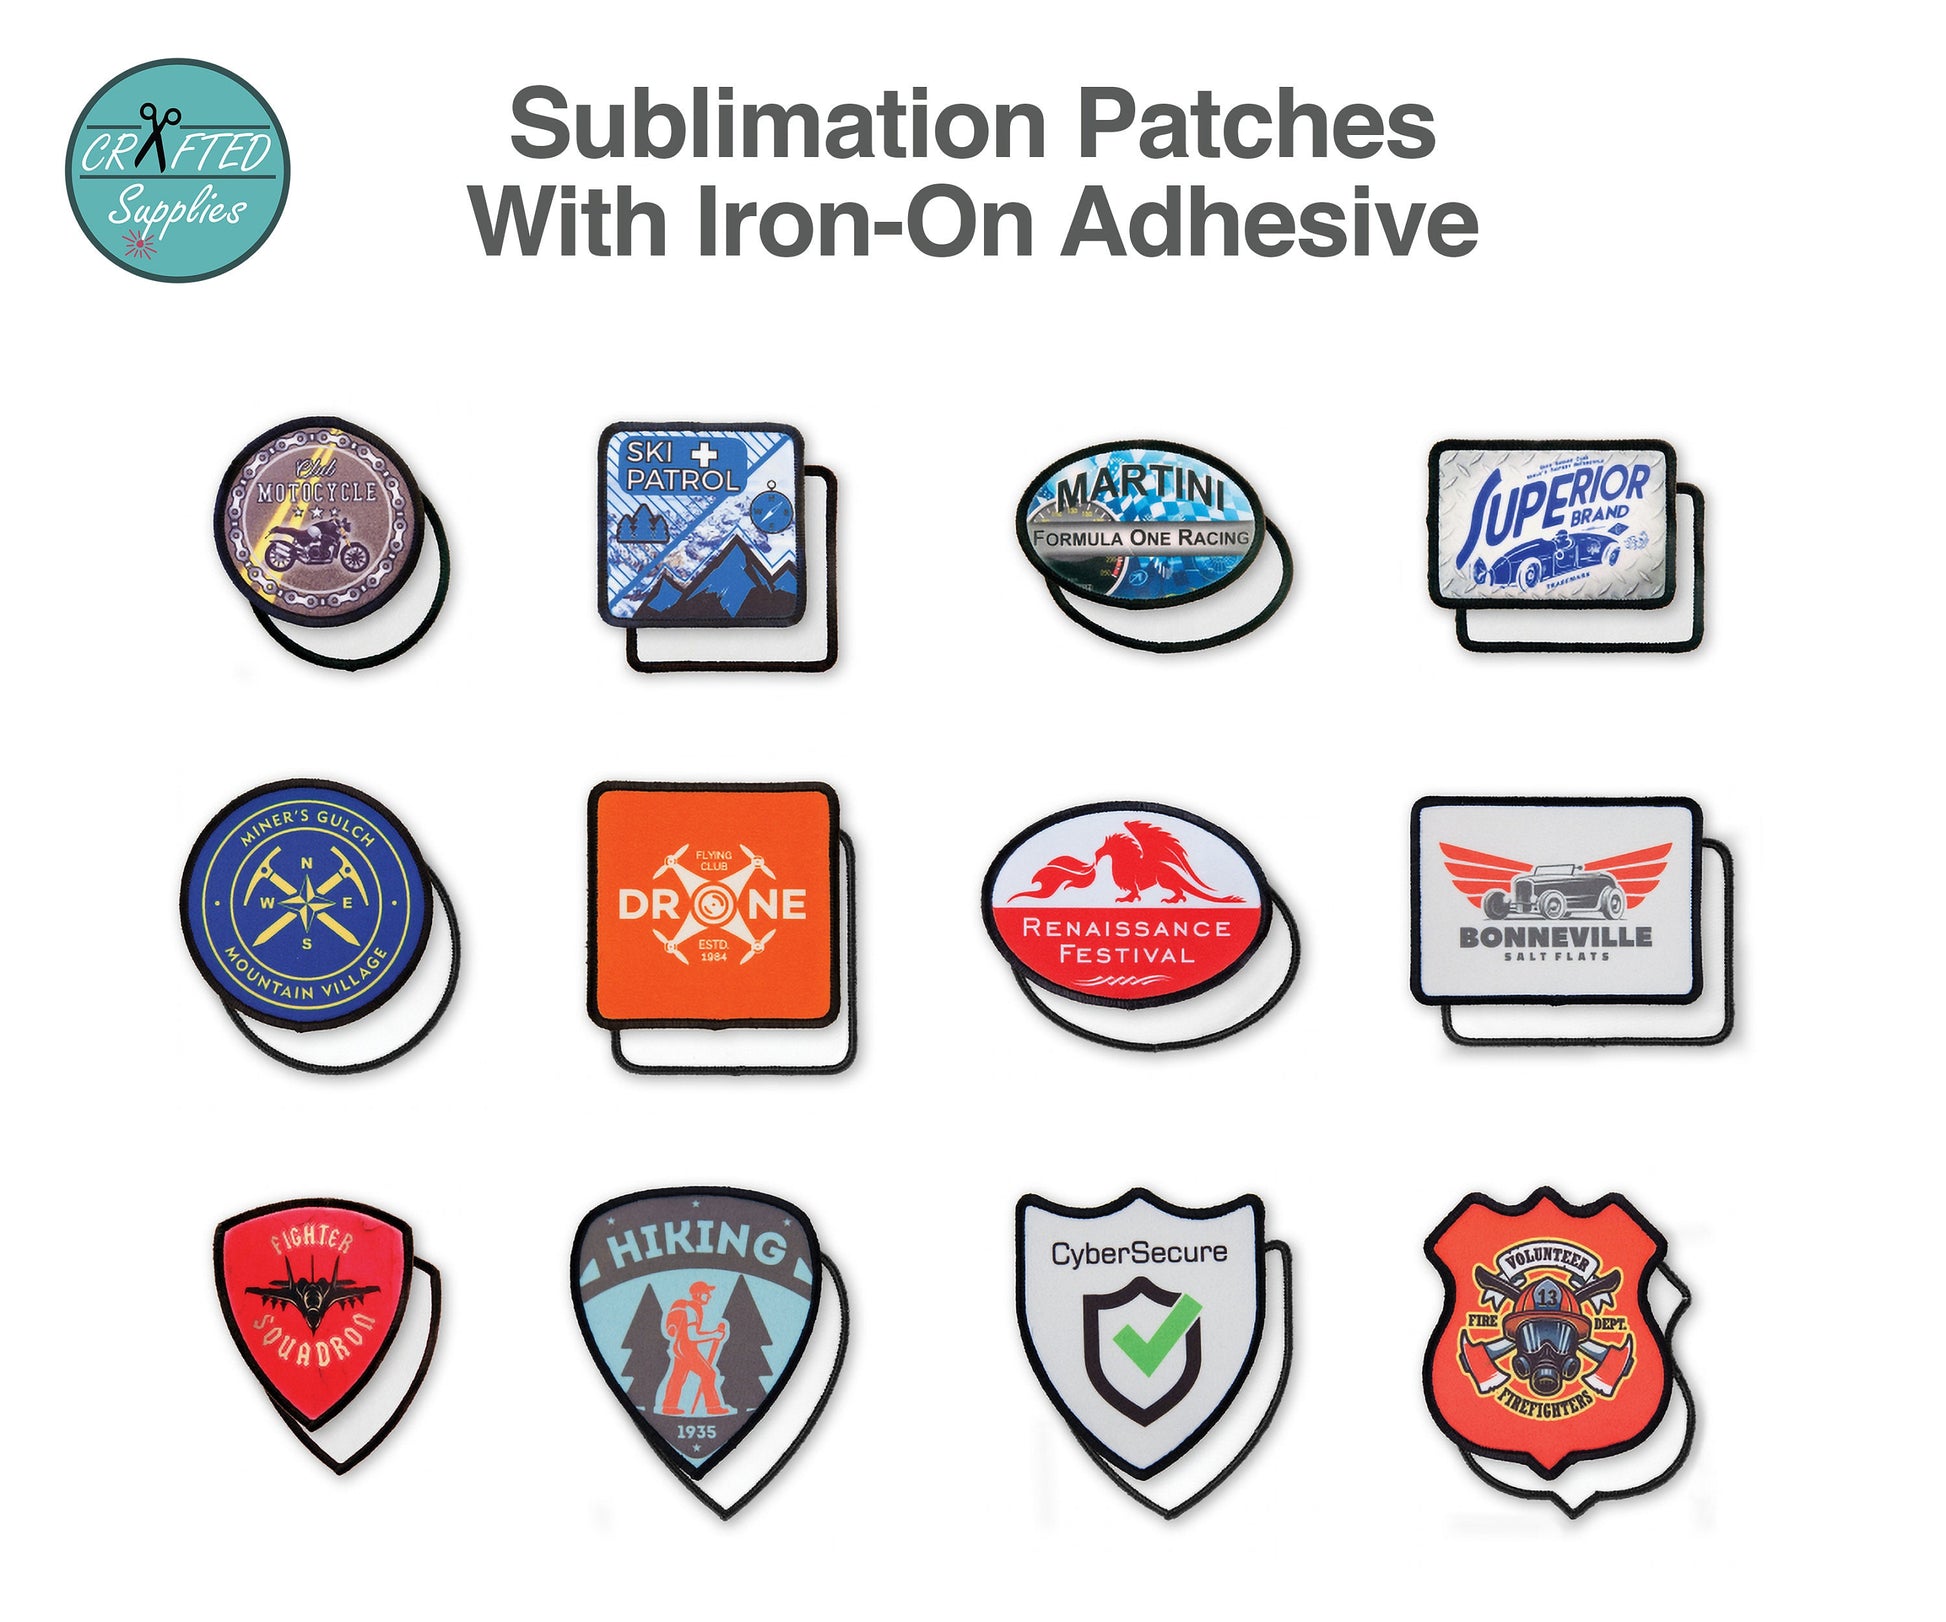 How to Make Sublimation Patches?